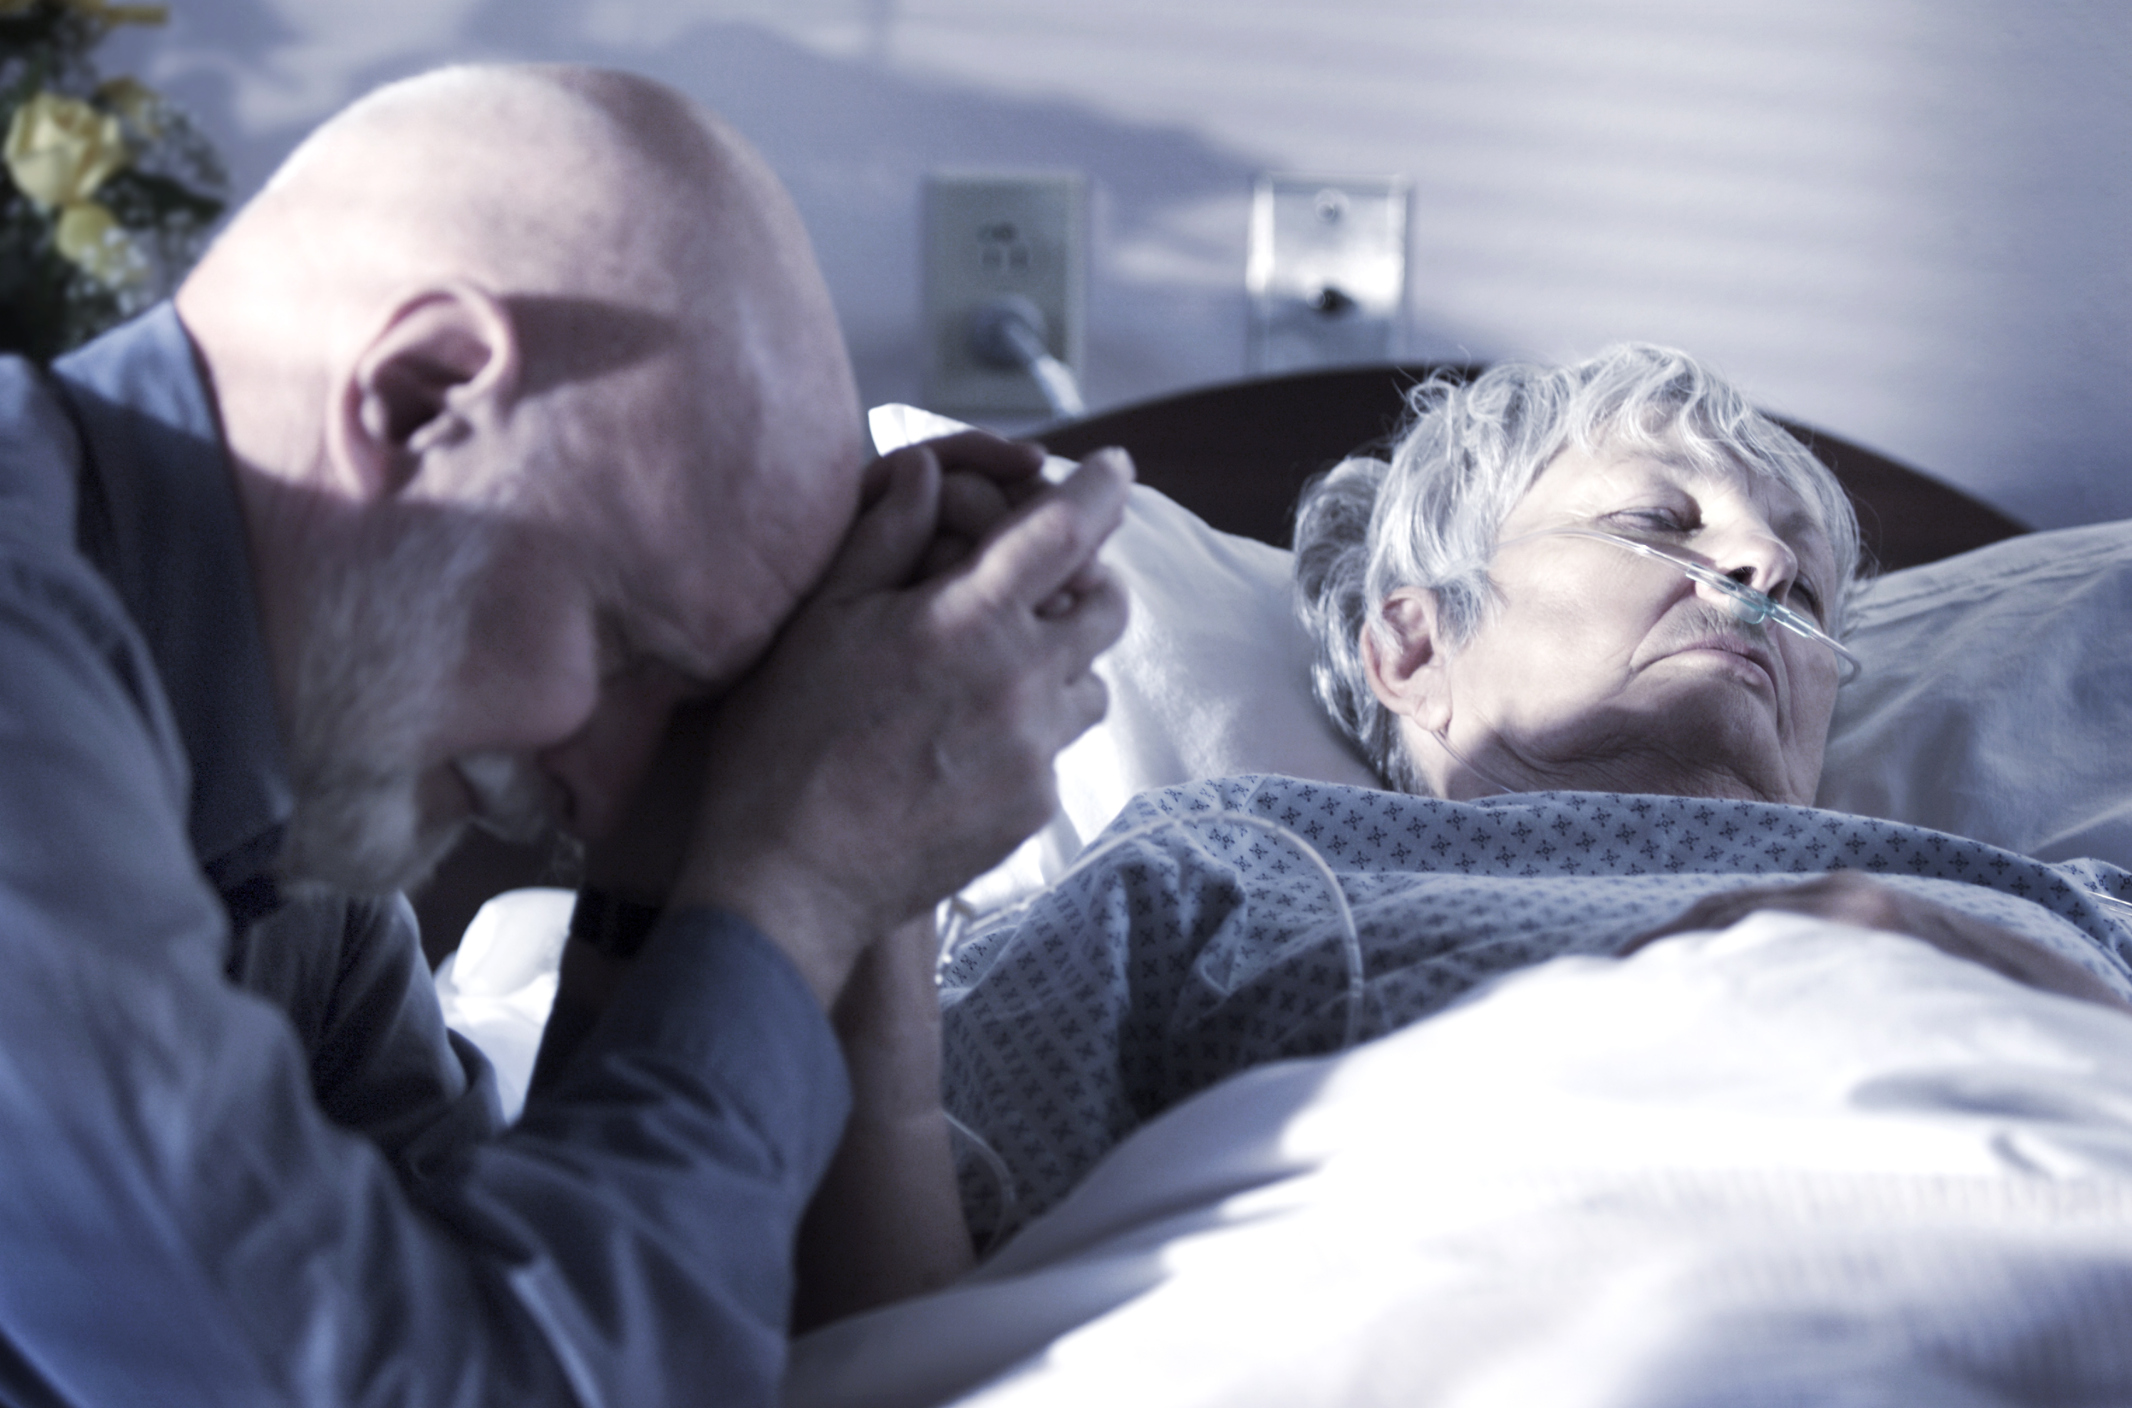 Death risk increases for frail s...